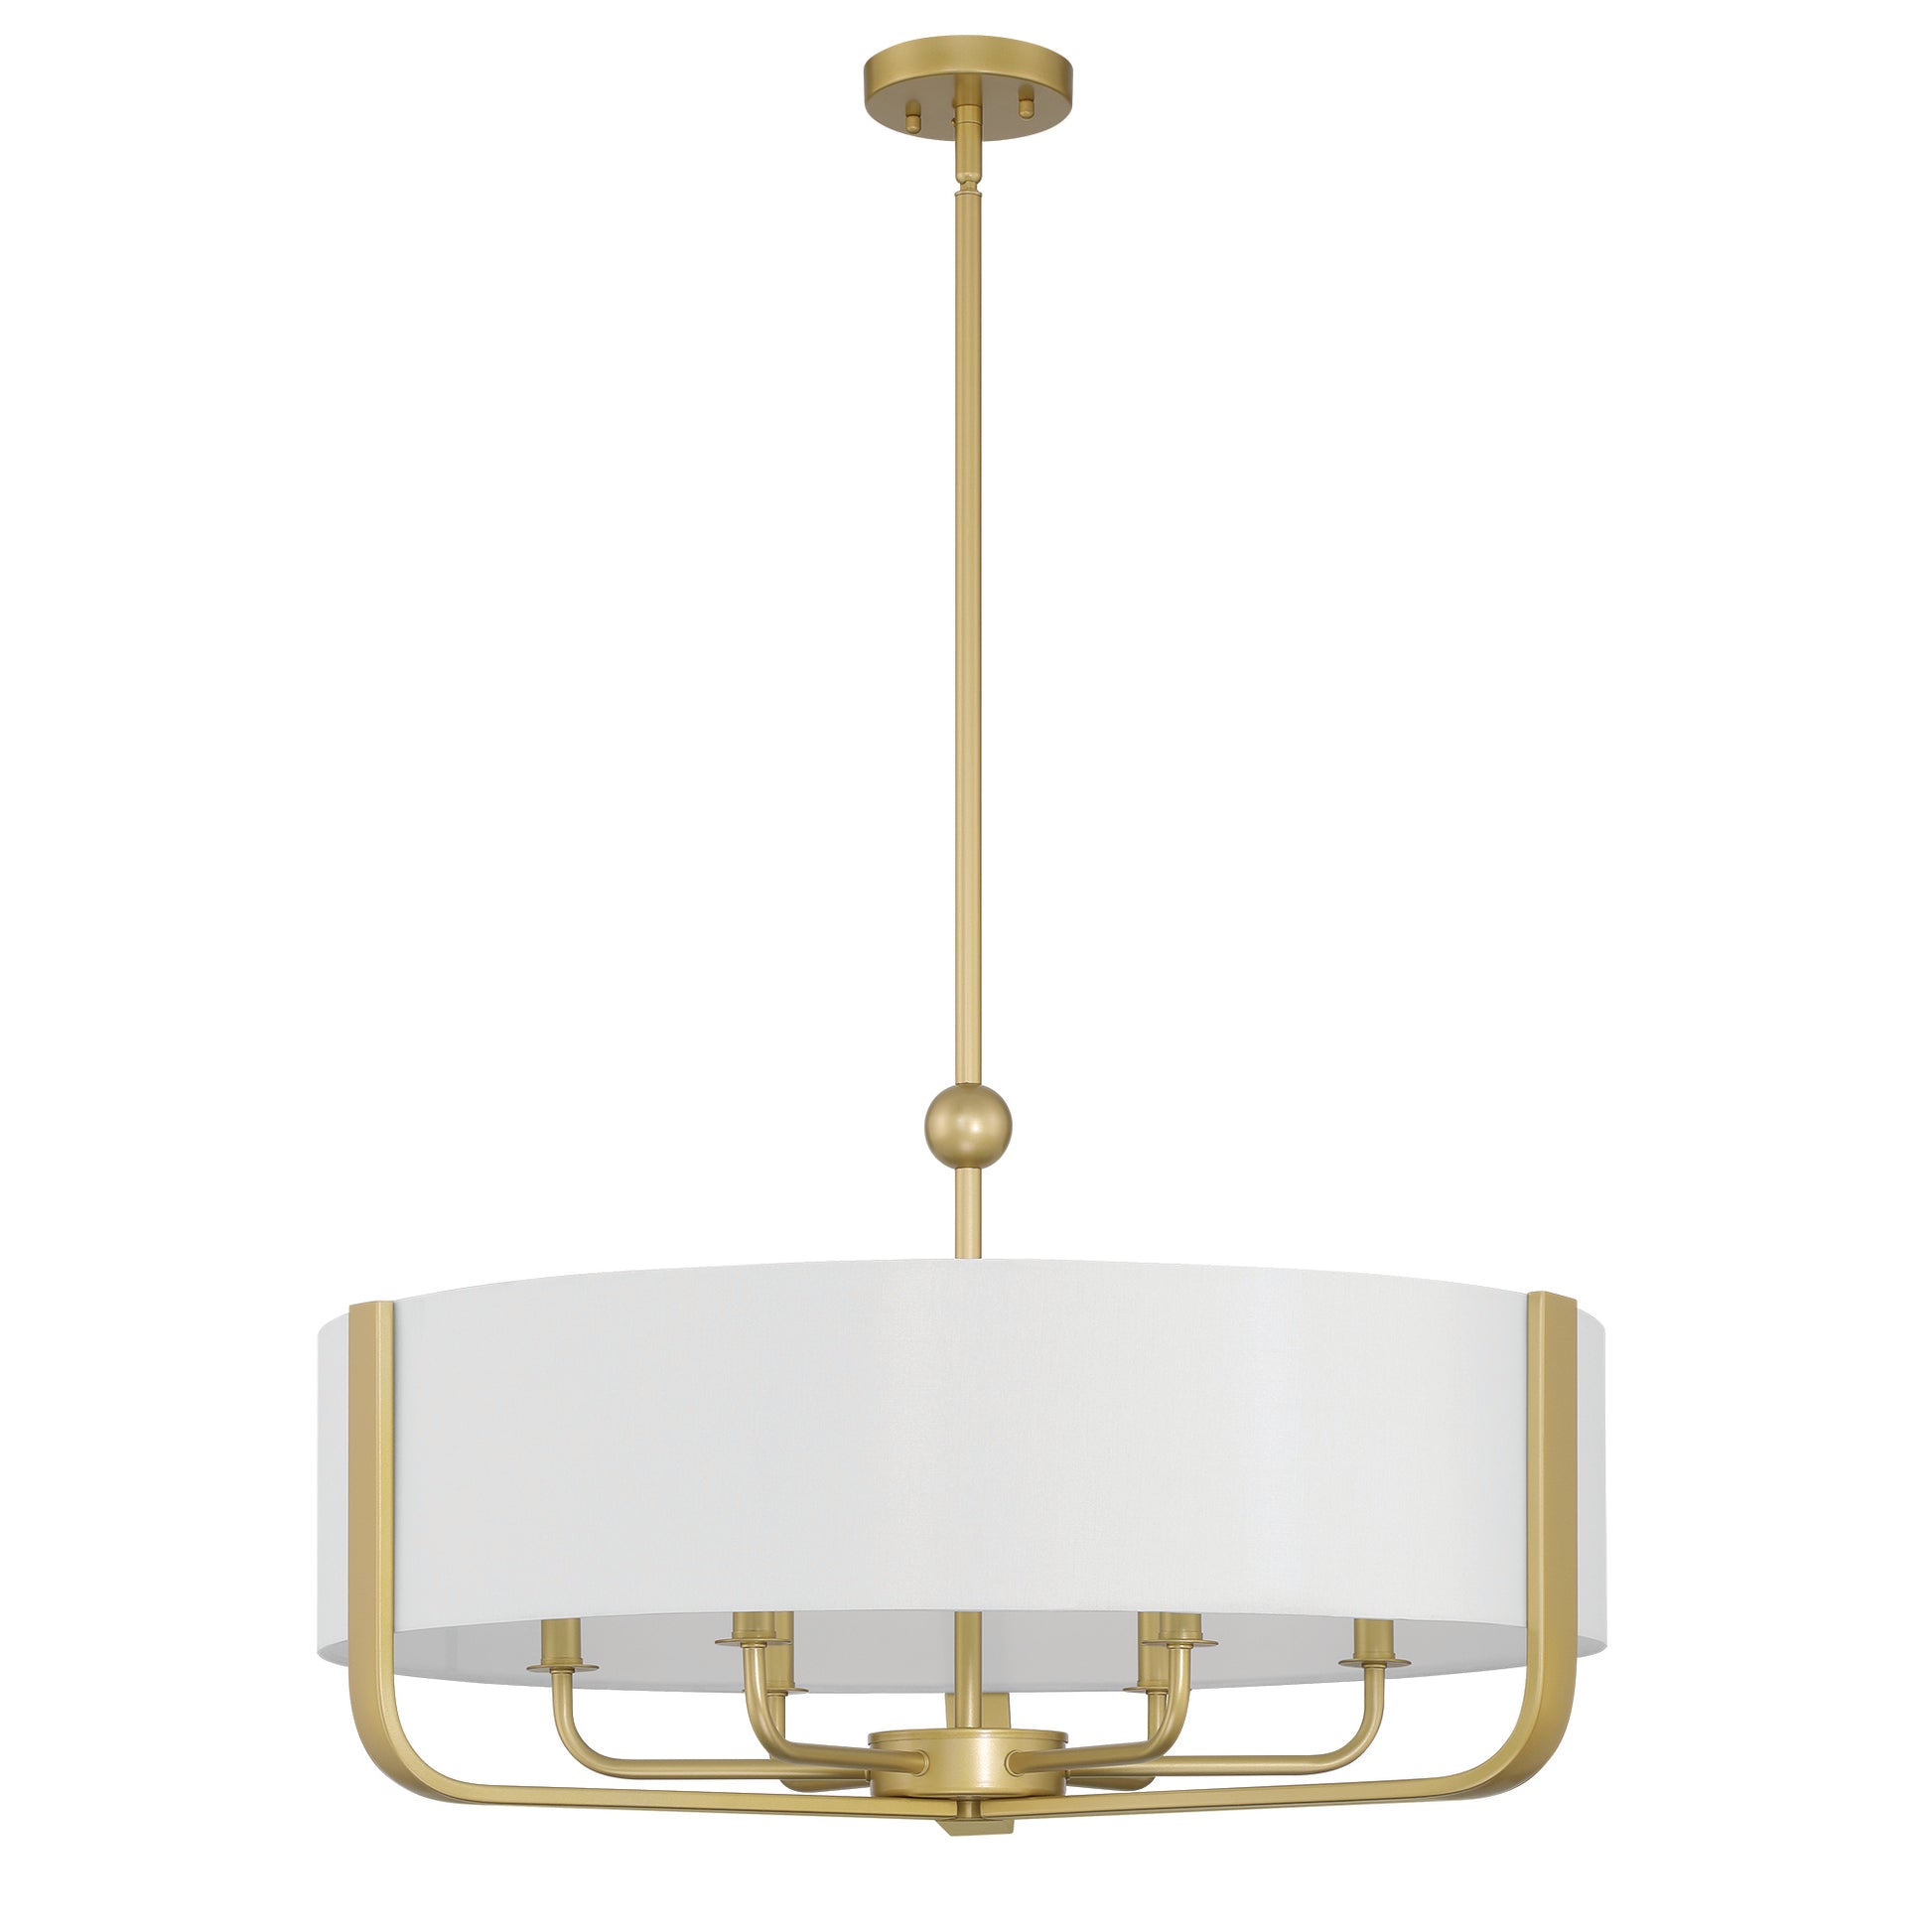 6 light dimmable drum chandelier (6) by ACROMA